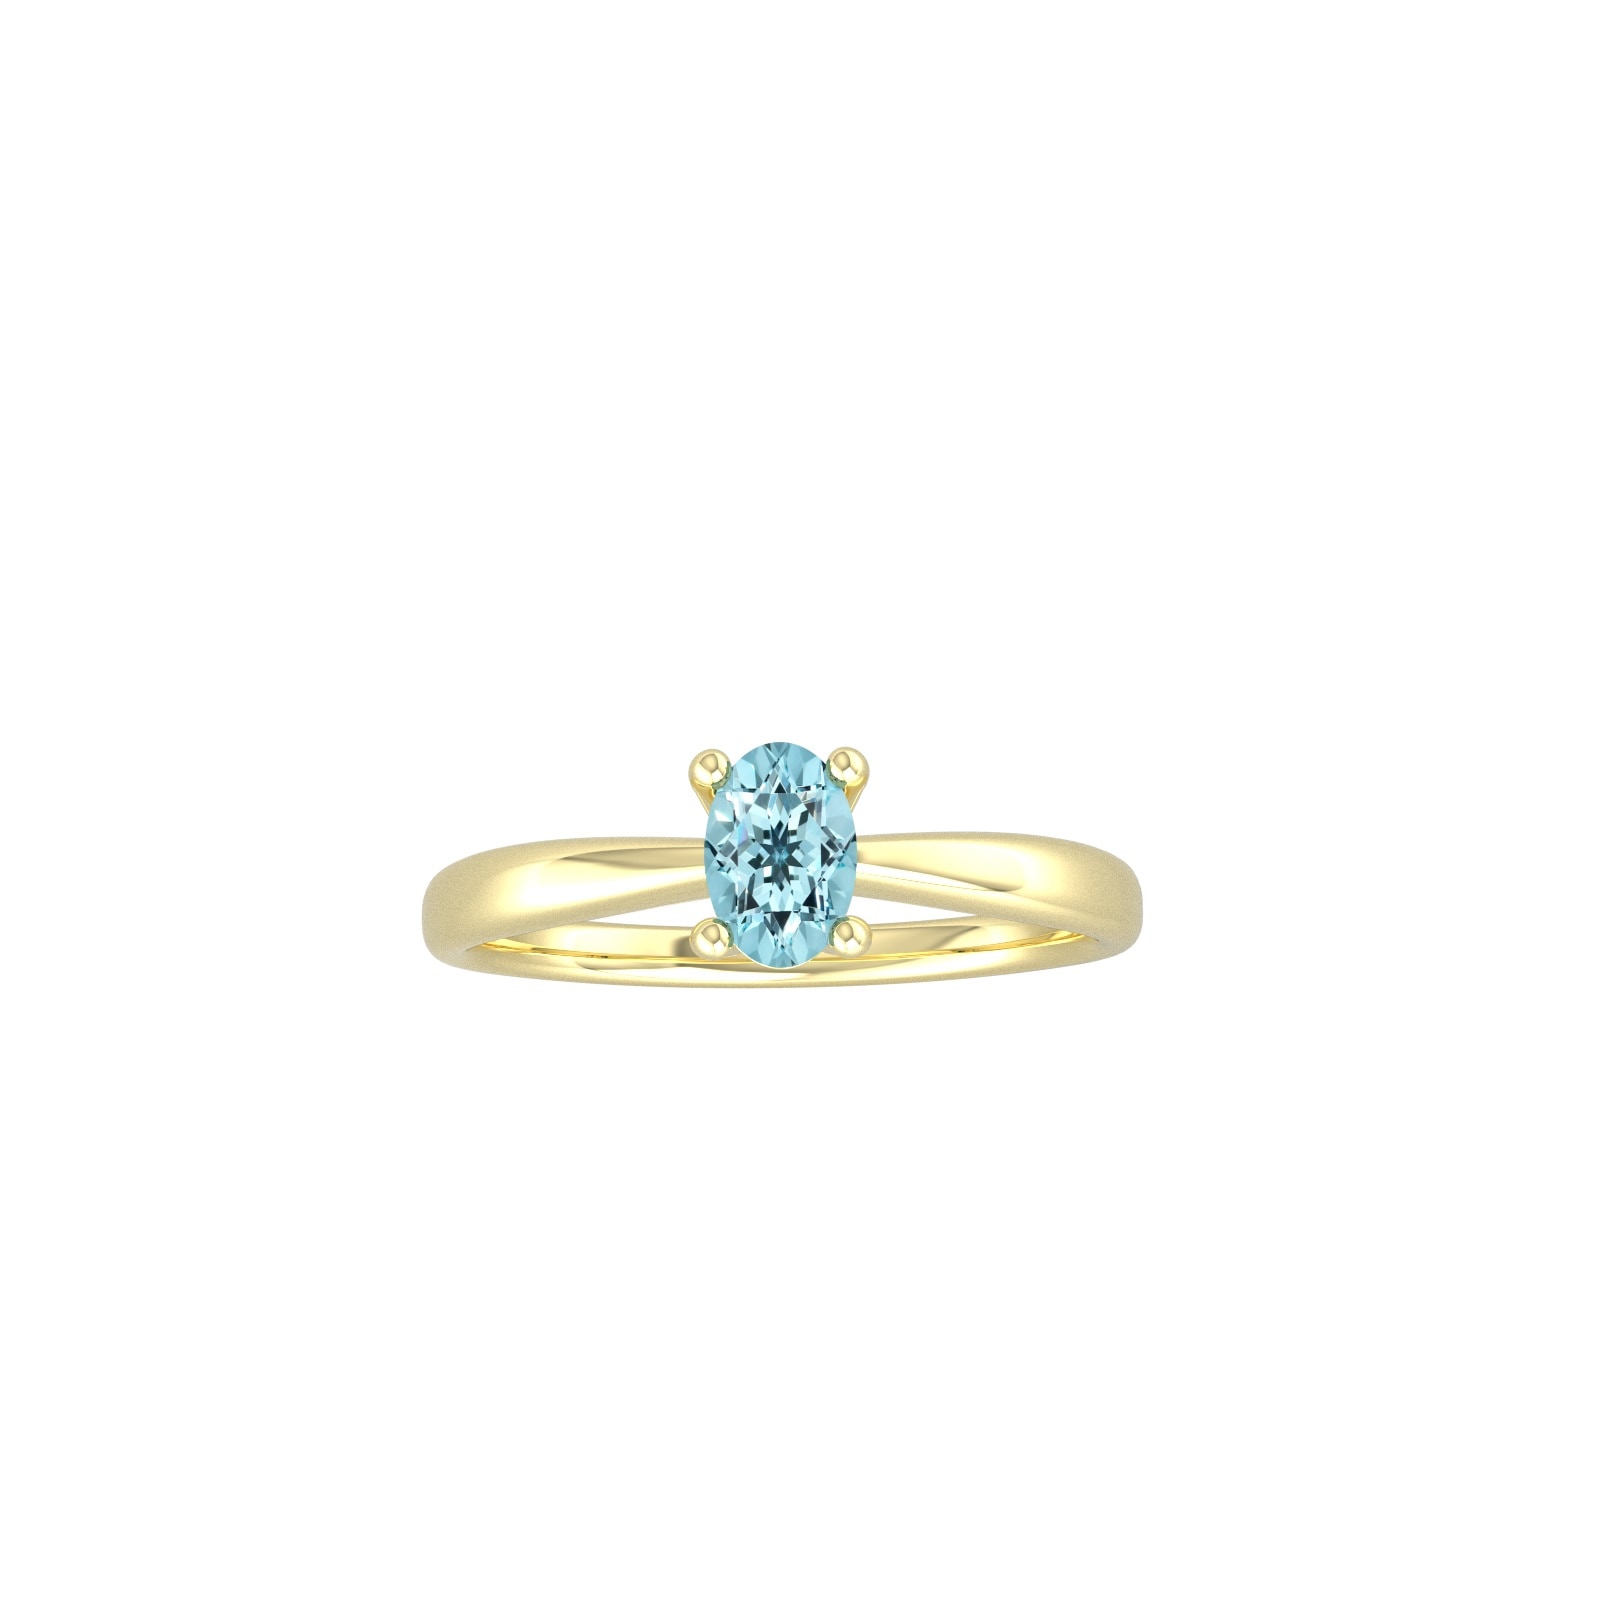 9ct Yellow Gold 4 Claw Oval Aquamarine Ring